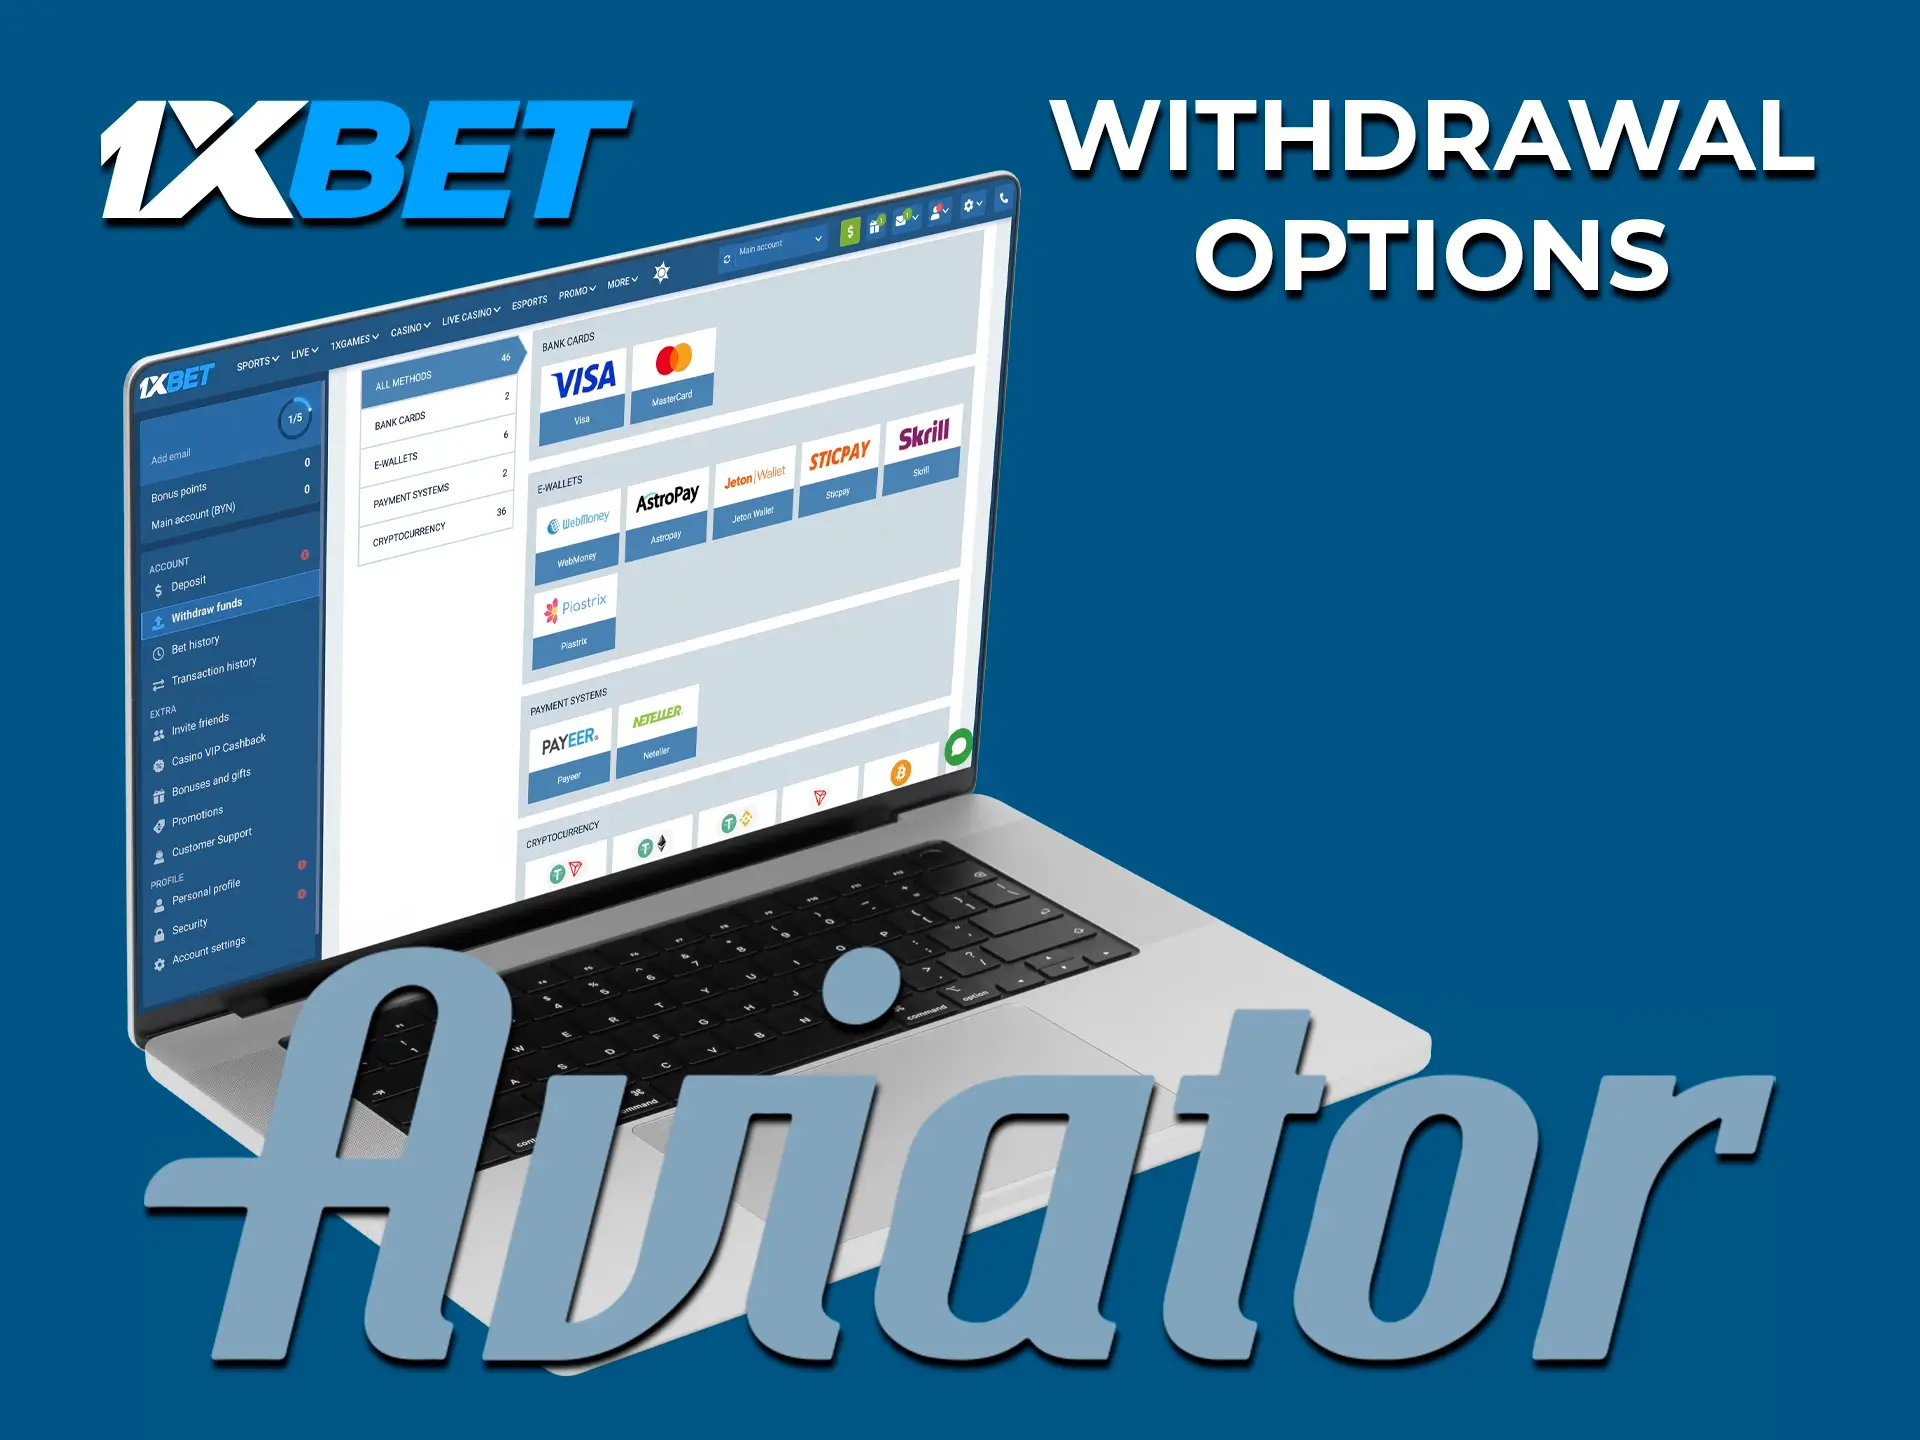 Most of the popular withdrawal methods are available to you at 1xBet Casino, use the ones that are convenient for you.